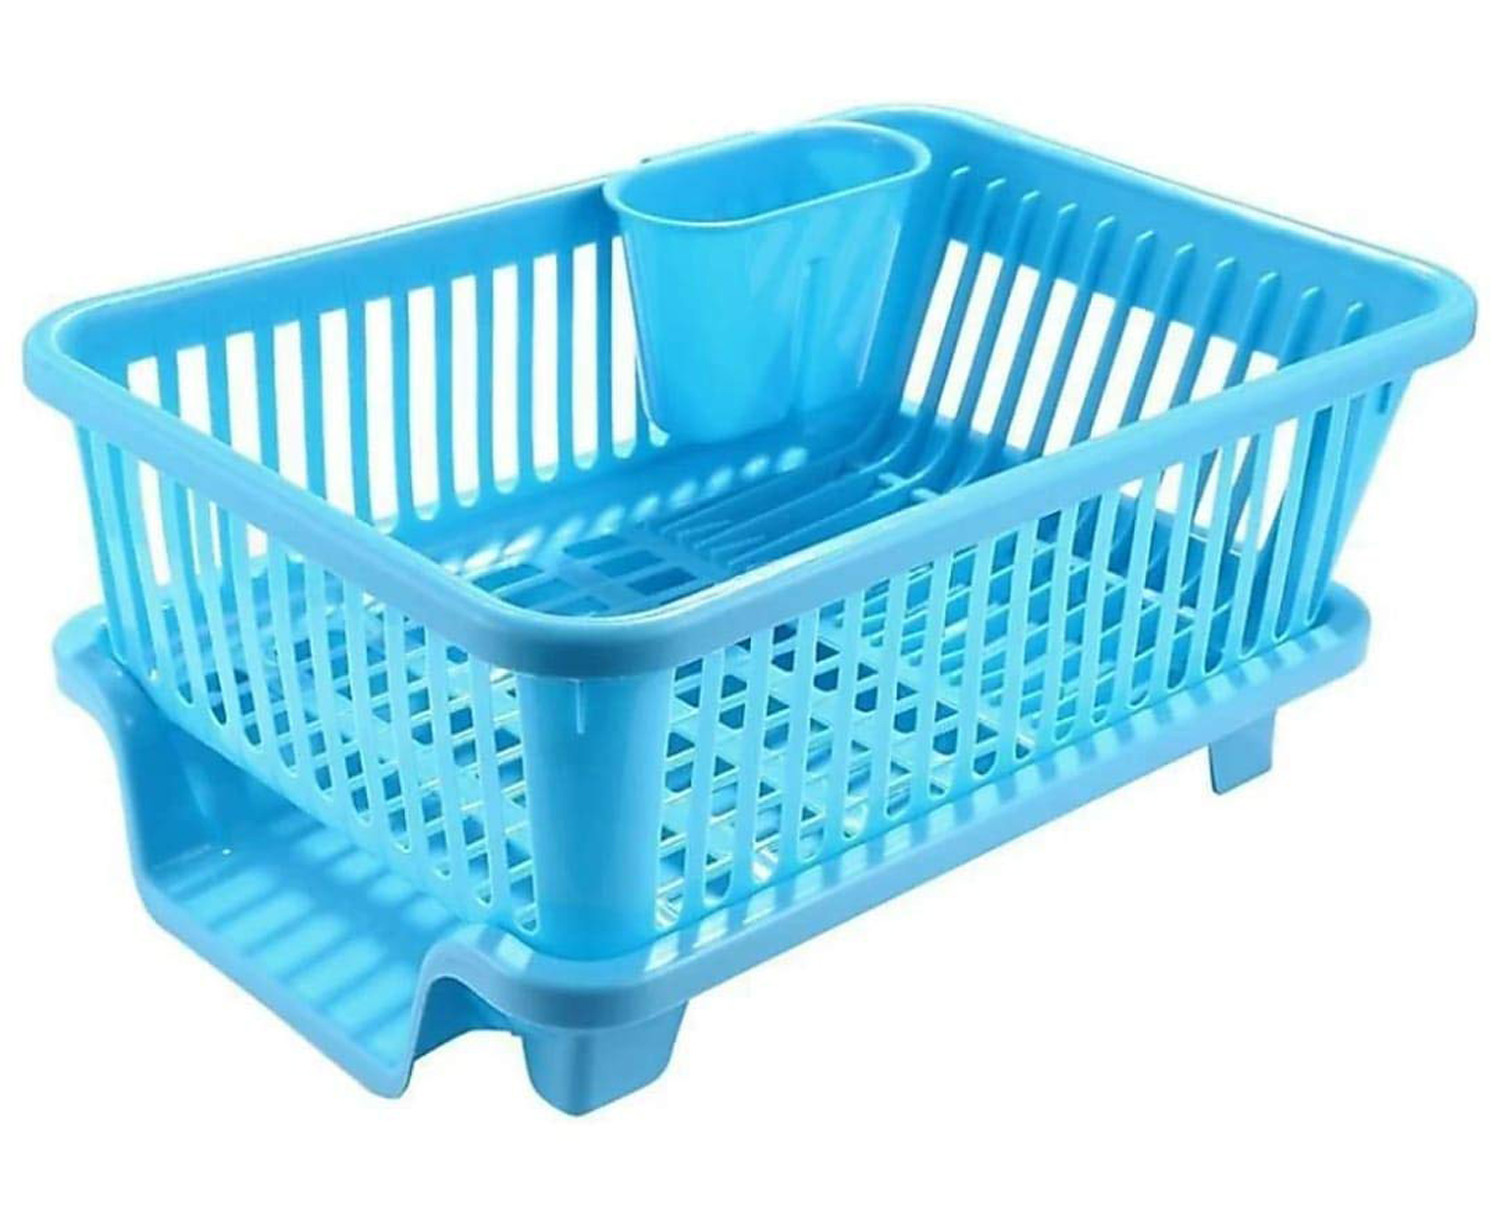 Kuber Industries  3 in 1 Large Durable Plastic Kitchen Sink Dish Rack Drainer Drying Rack Washing Basket with Tray for Kitchen, Dish Rack Organizers, Utensils Tools Cutlery (Blue)